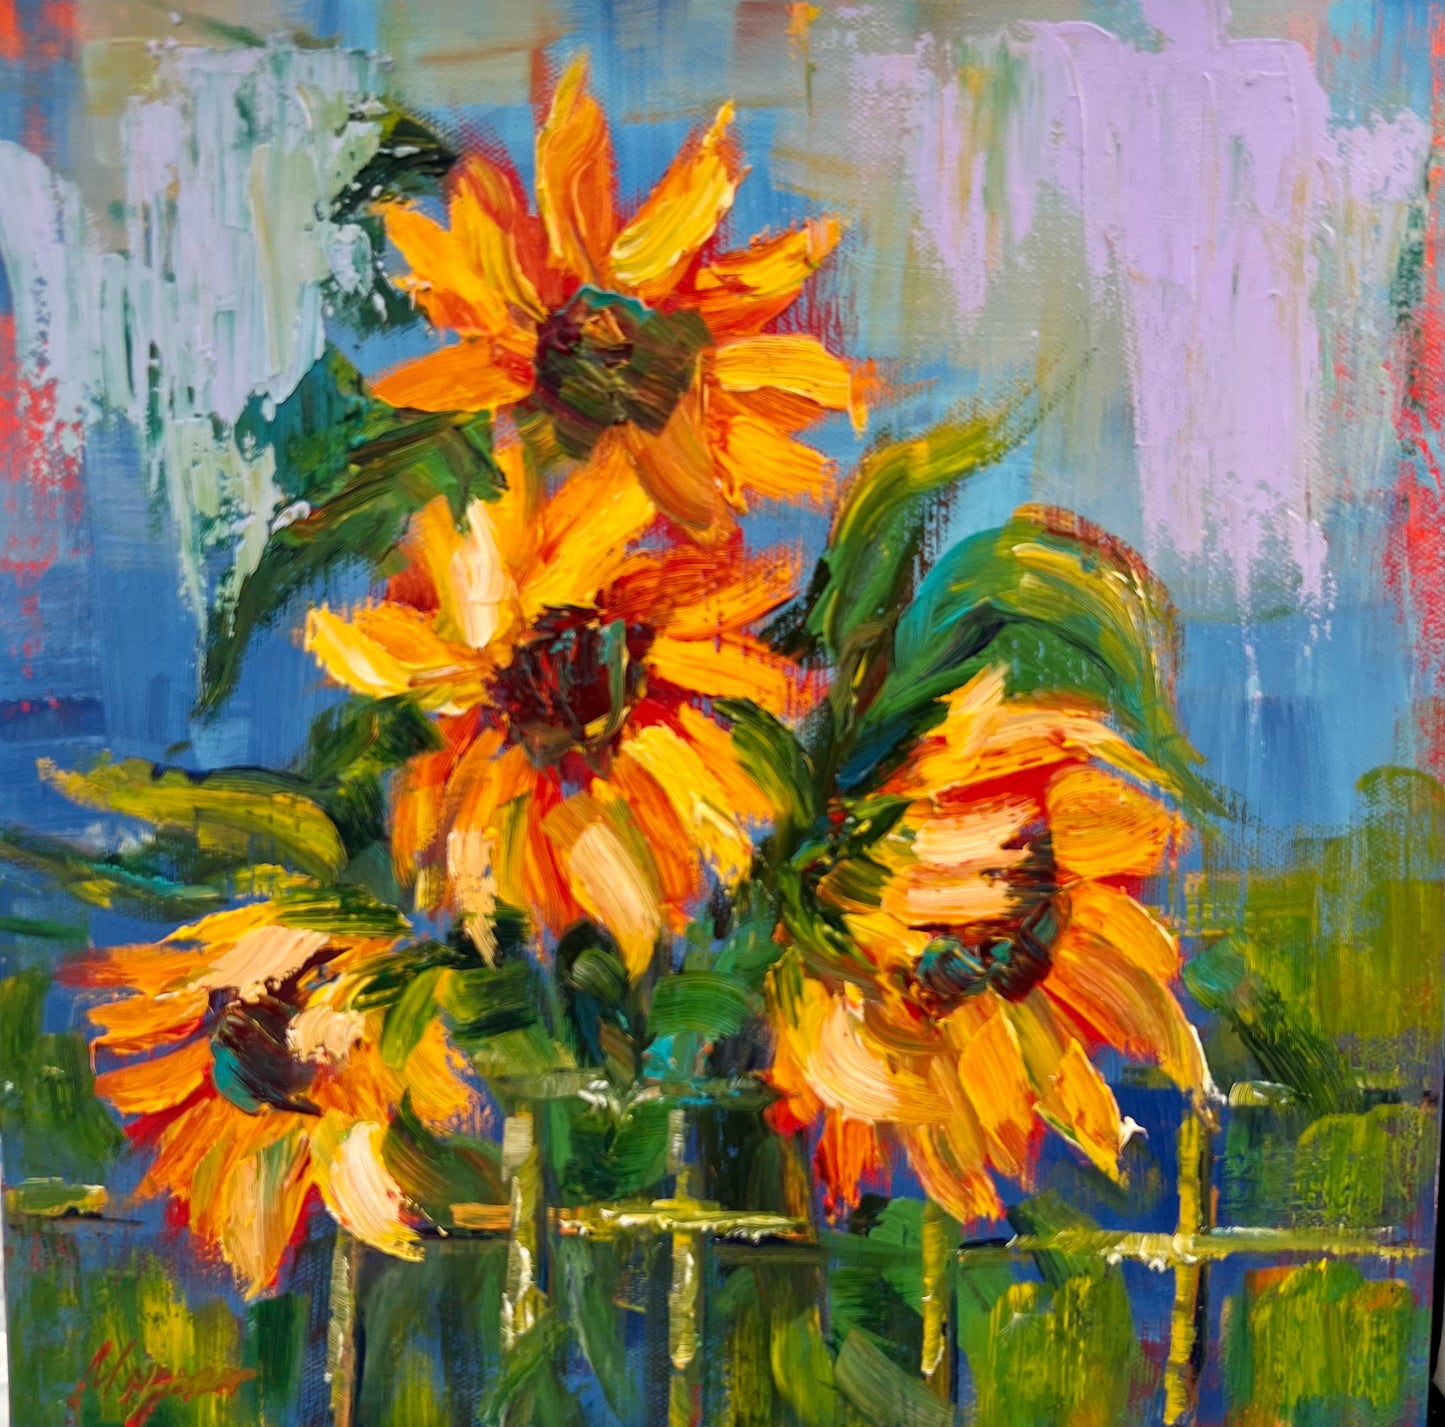 You are a Sunflower II (ORIGINAL SOLD)